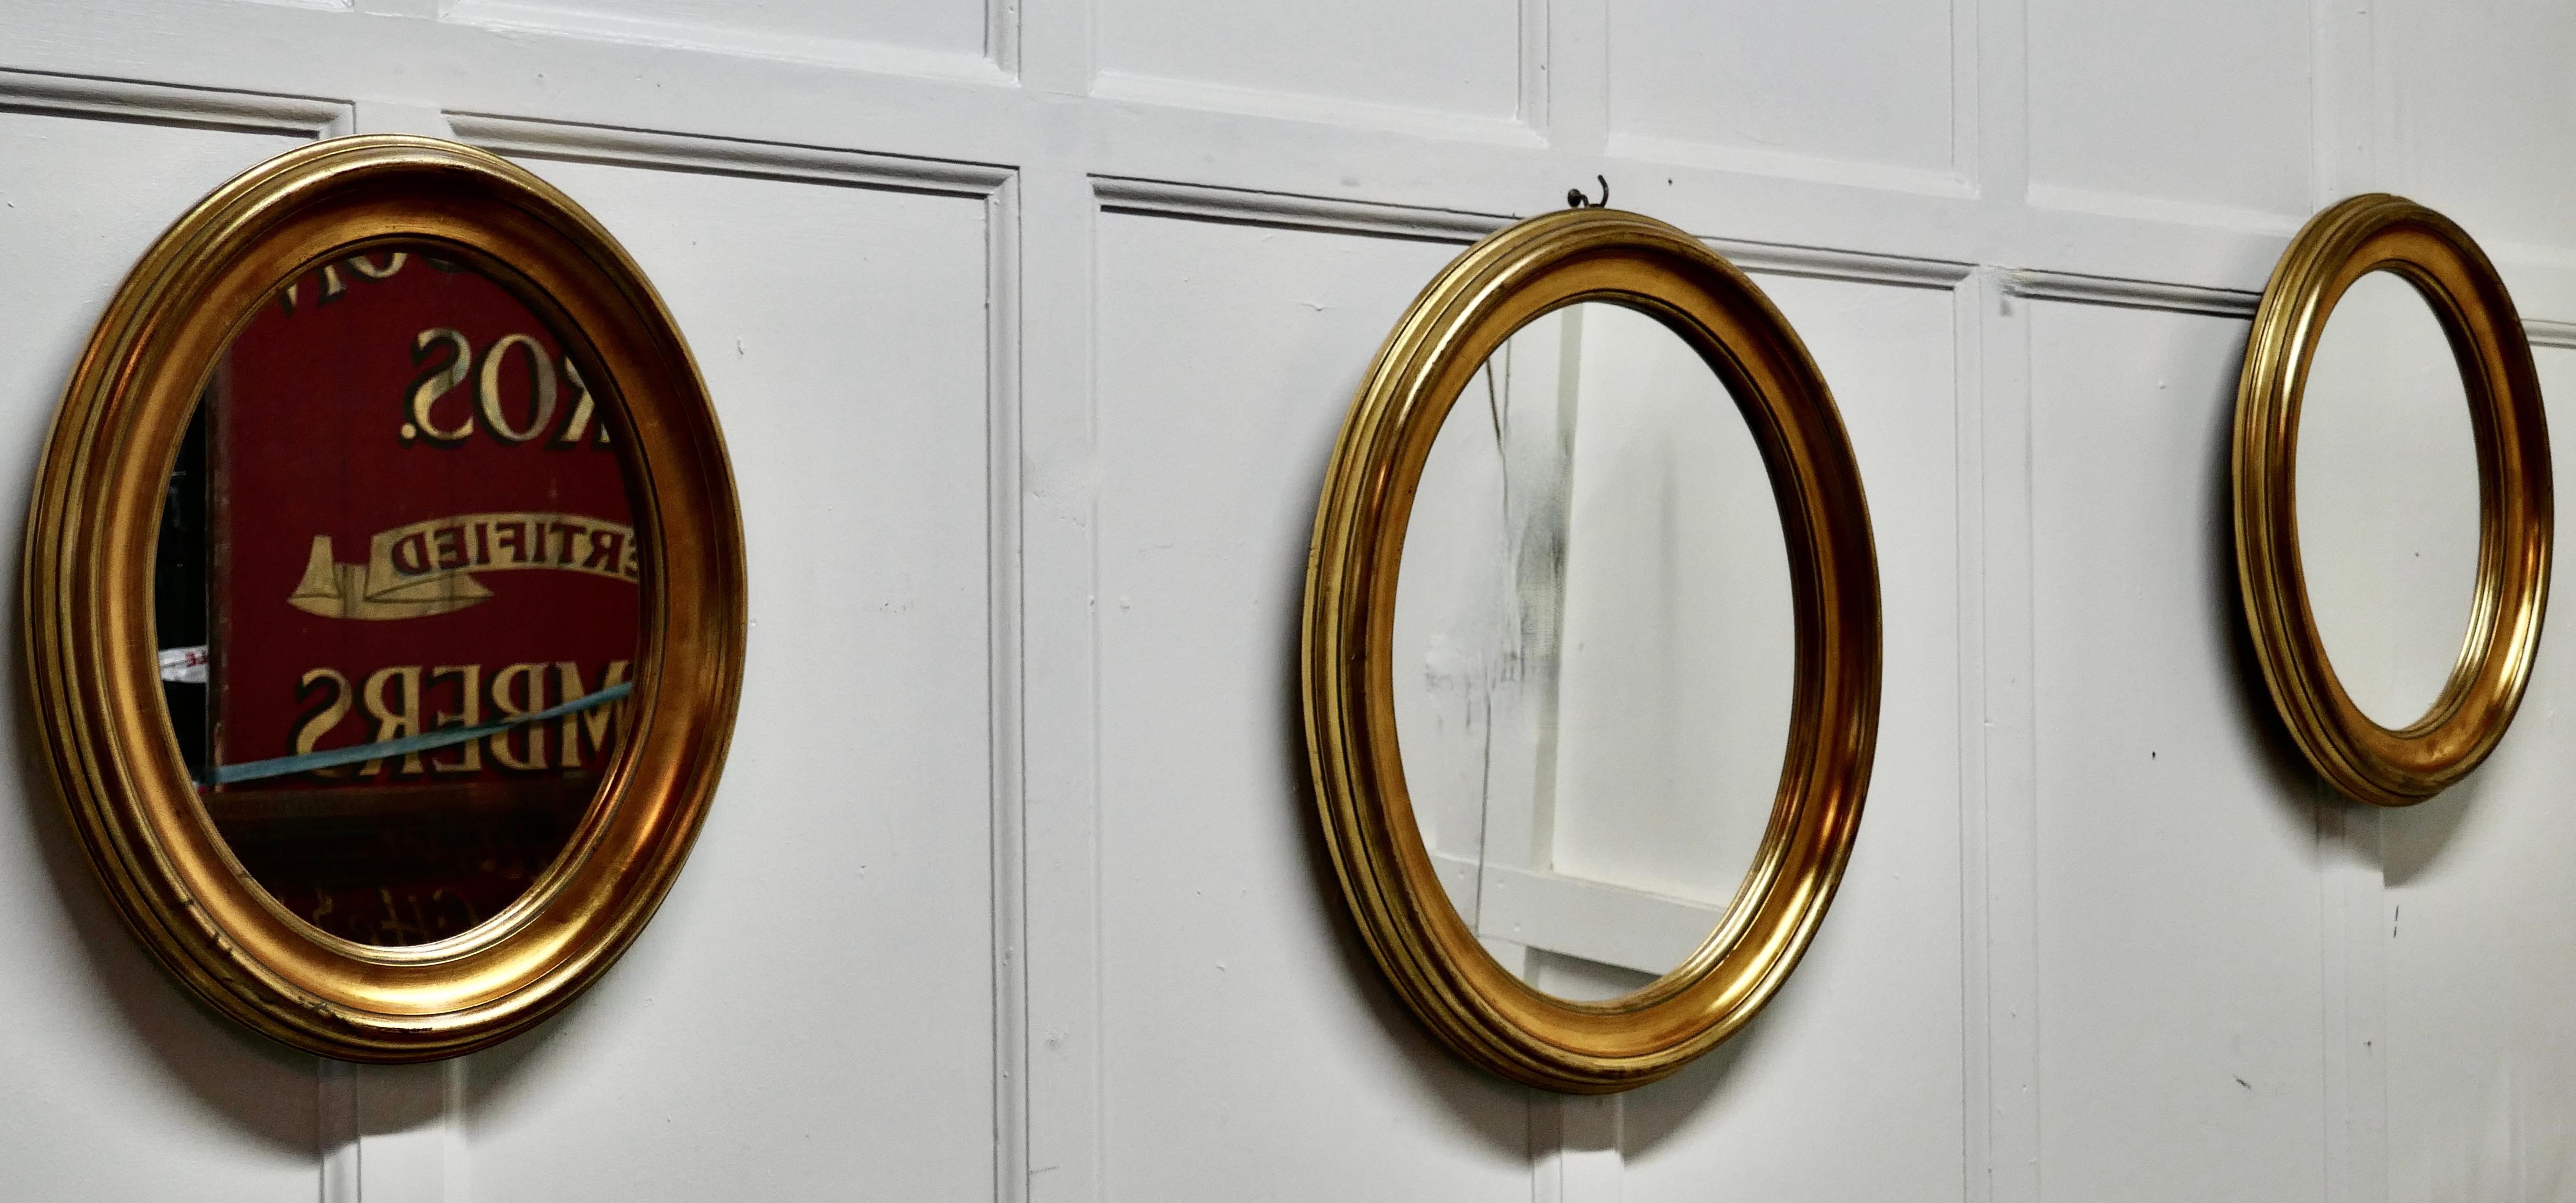 A Superb Trio of French Oval Giltwood  Mirrors

Three mirrors, 2 are 20” high x 16” wide and the other is 24” high x 20” wide otherwise identical
The mirrors have a 3” wide moulded oval Gilt frame 
The old Oval frames are all in in very good